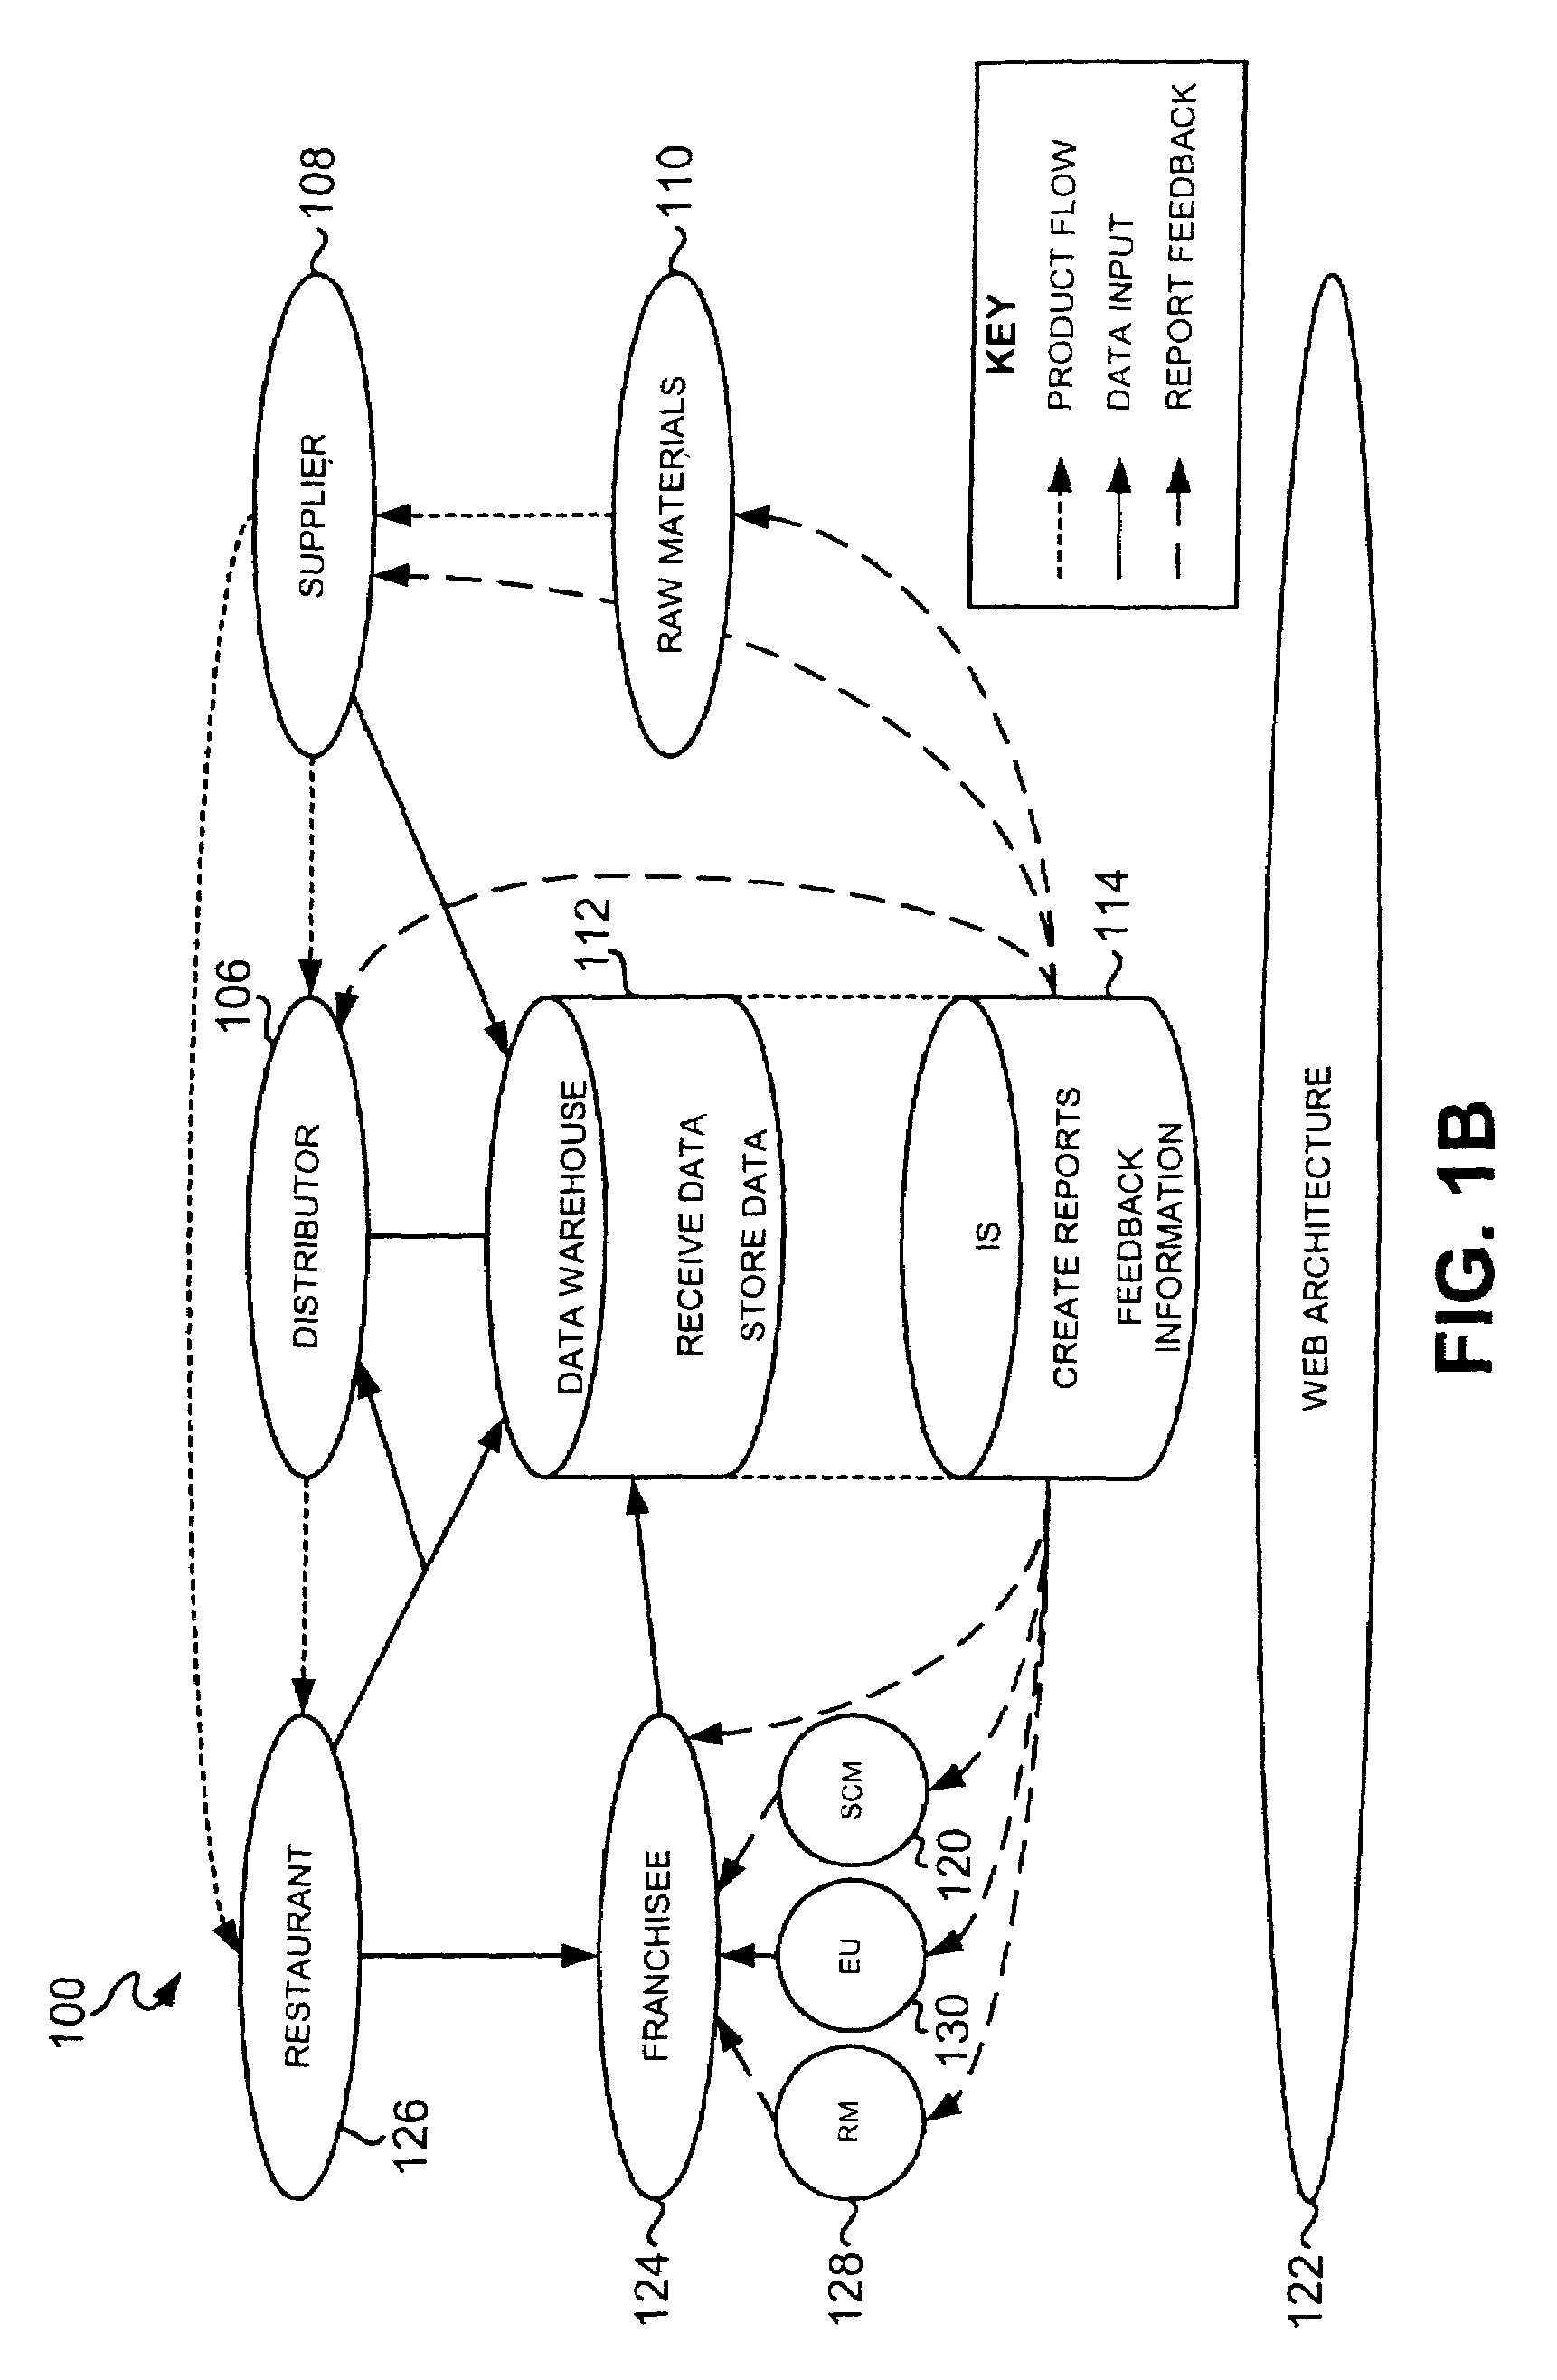 System, method and computer program product for error checking in a supply chain management framework